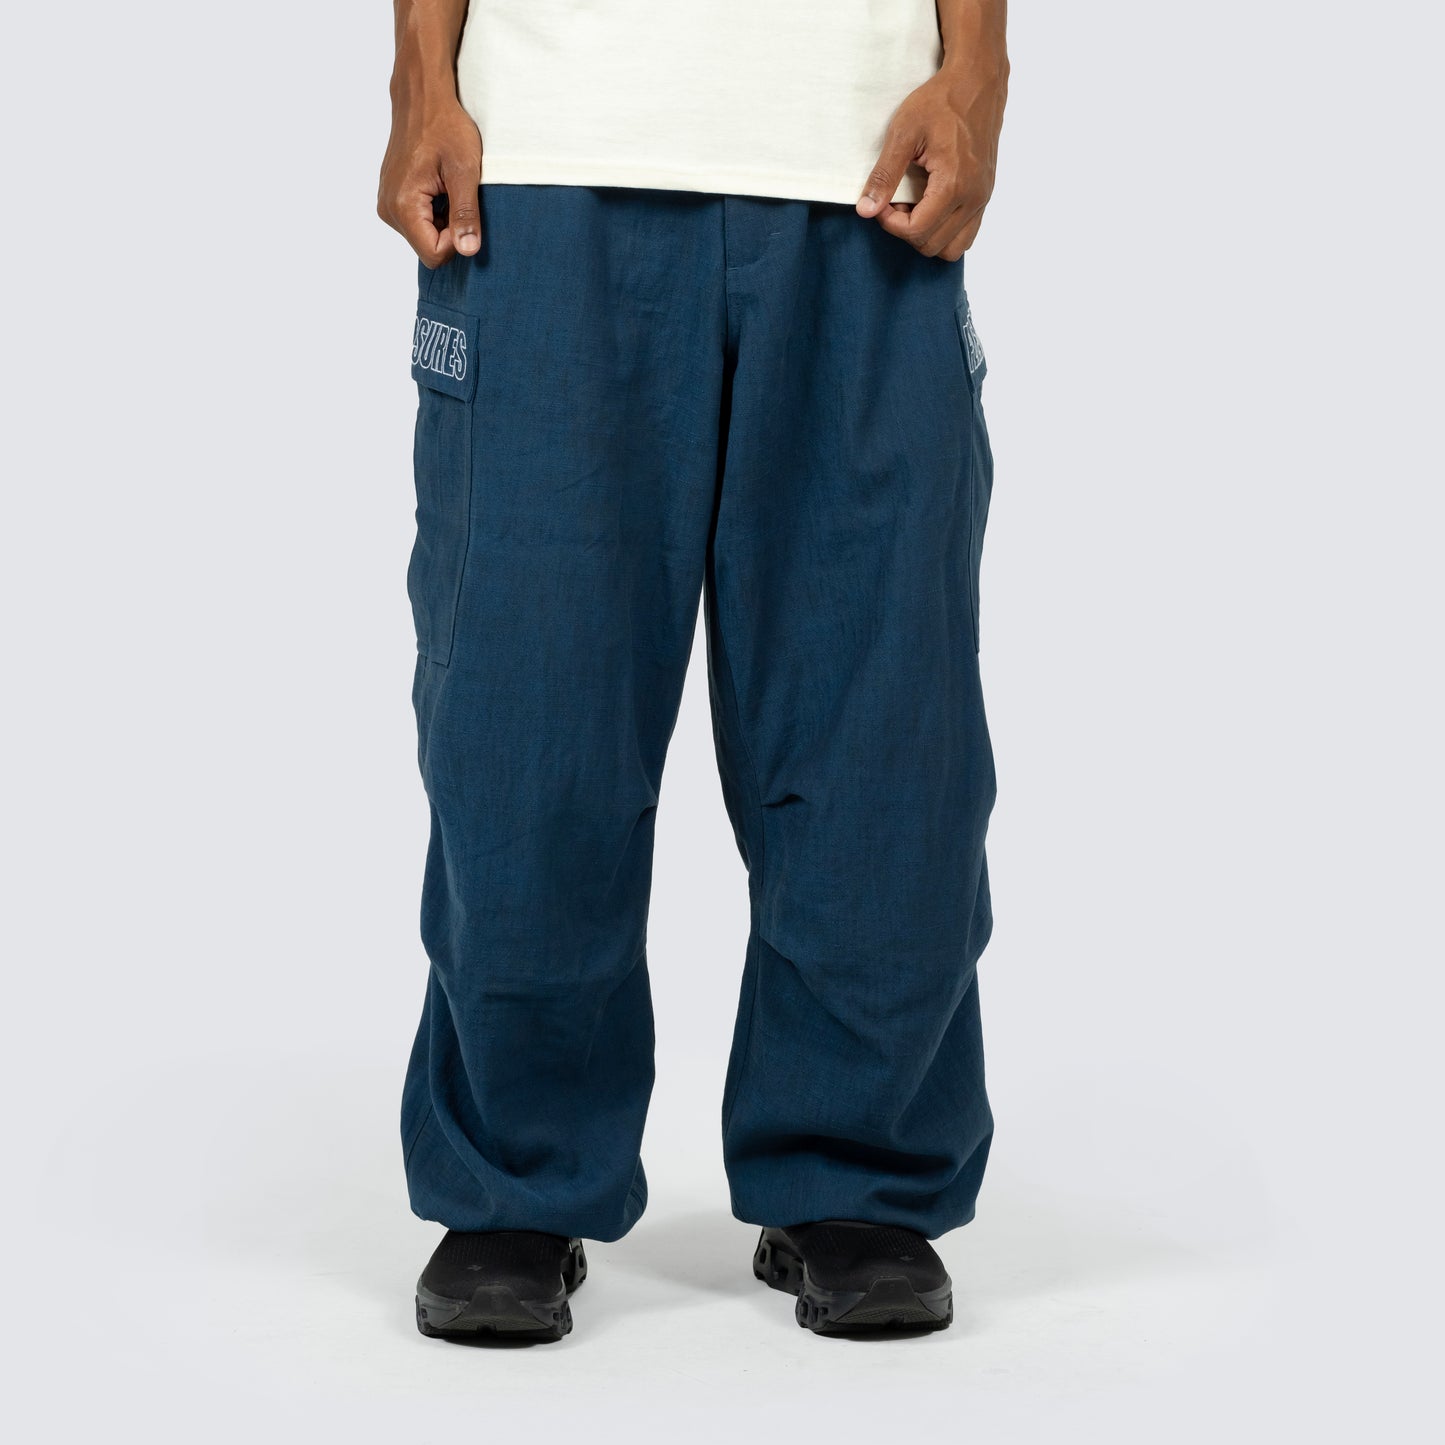 VISITOR BIG FIT CARGO PANTS